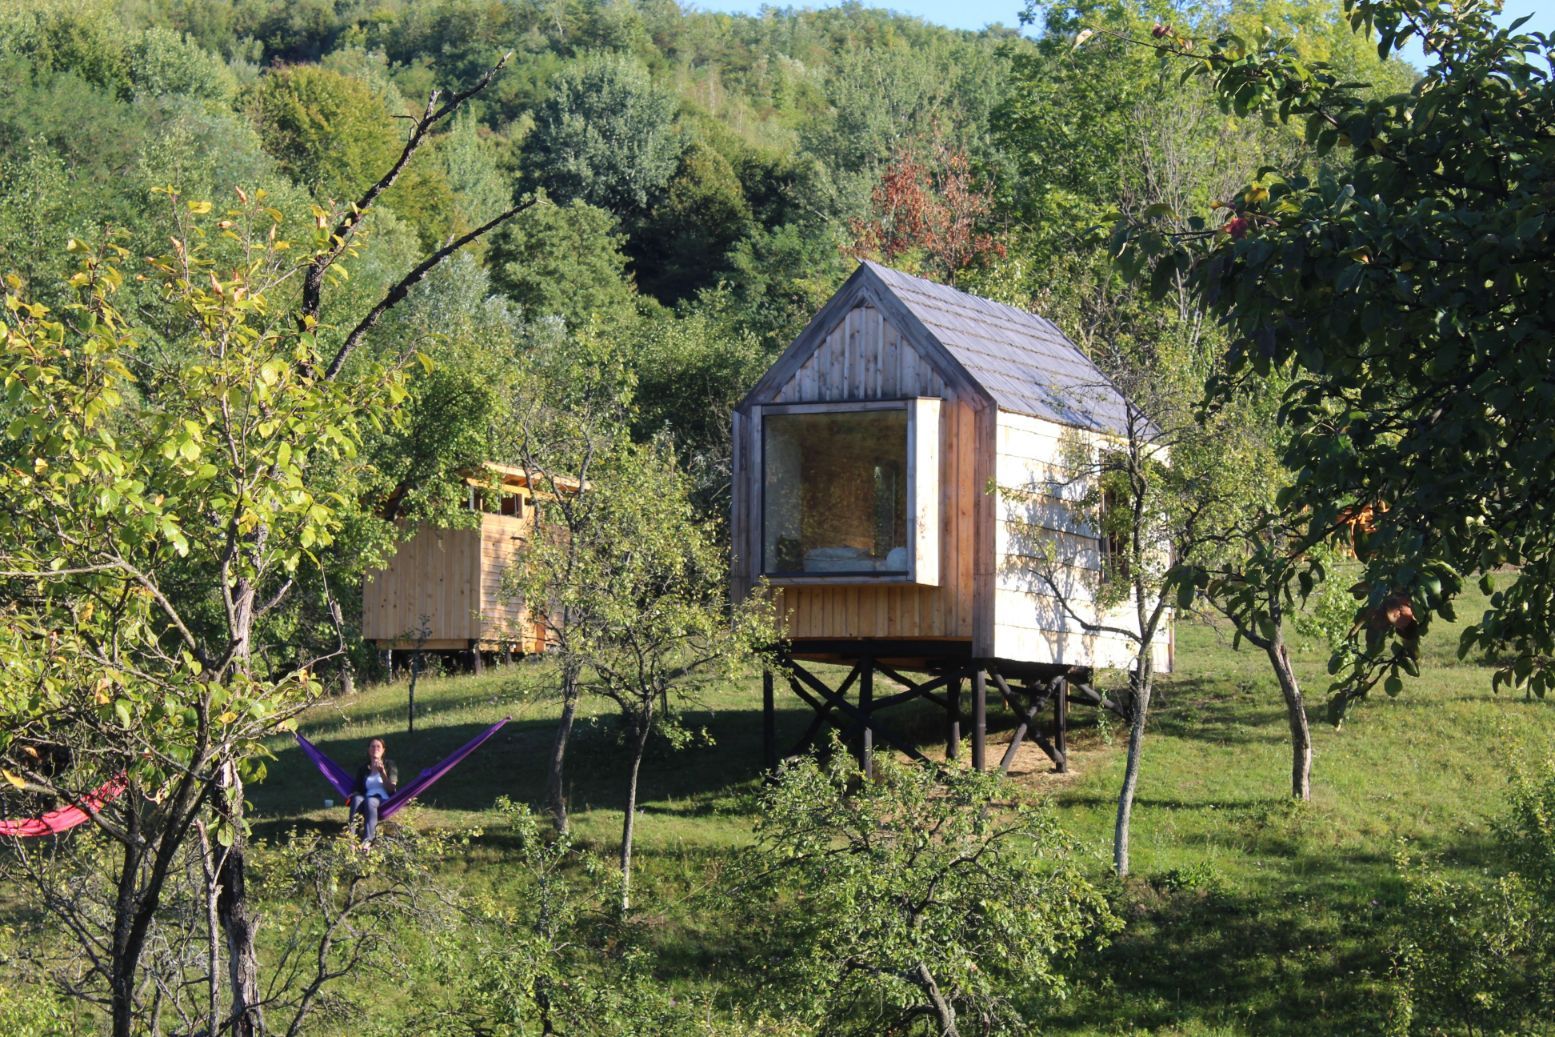 A MuMA tiny house, part of WeWilder's camp in Romania.